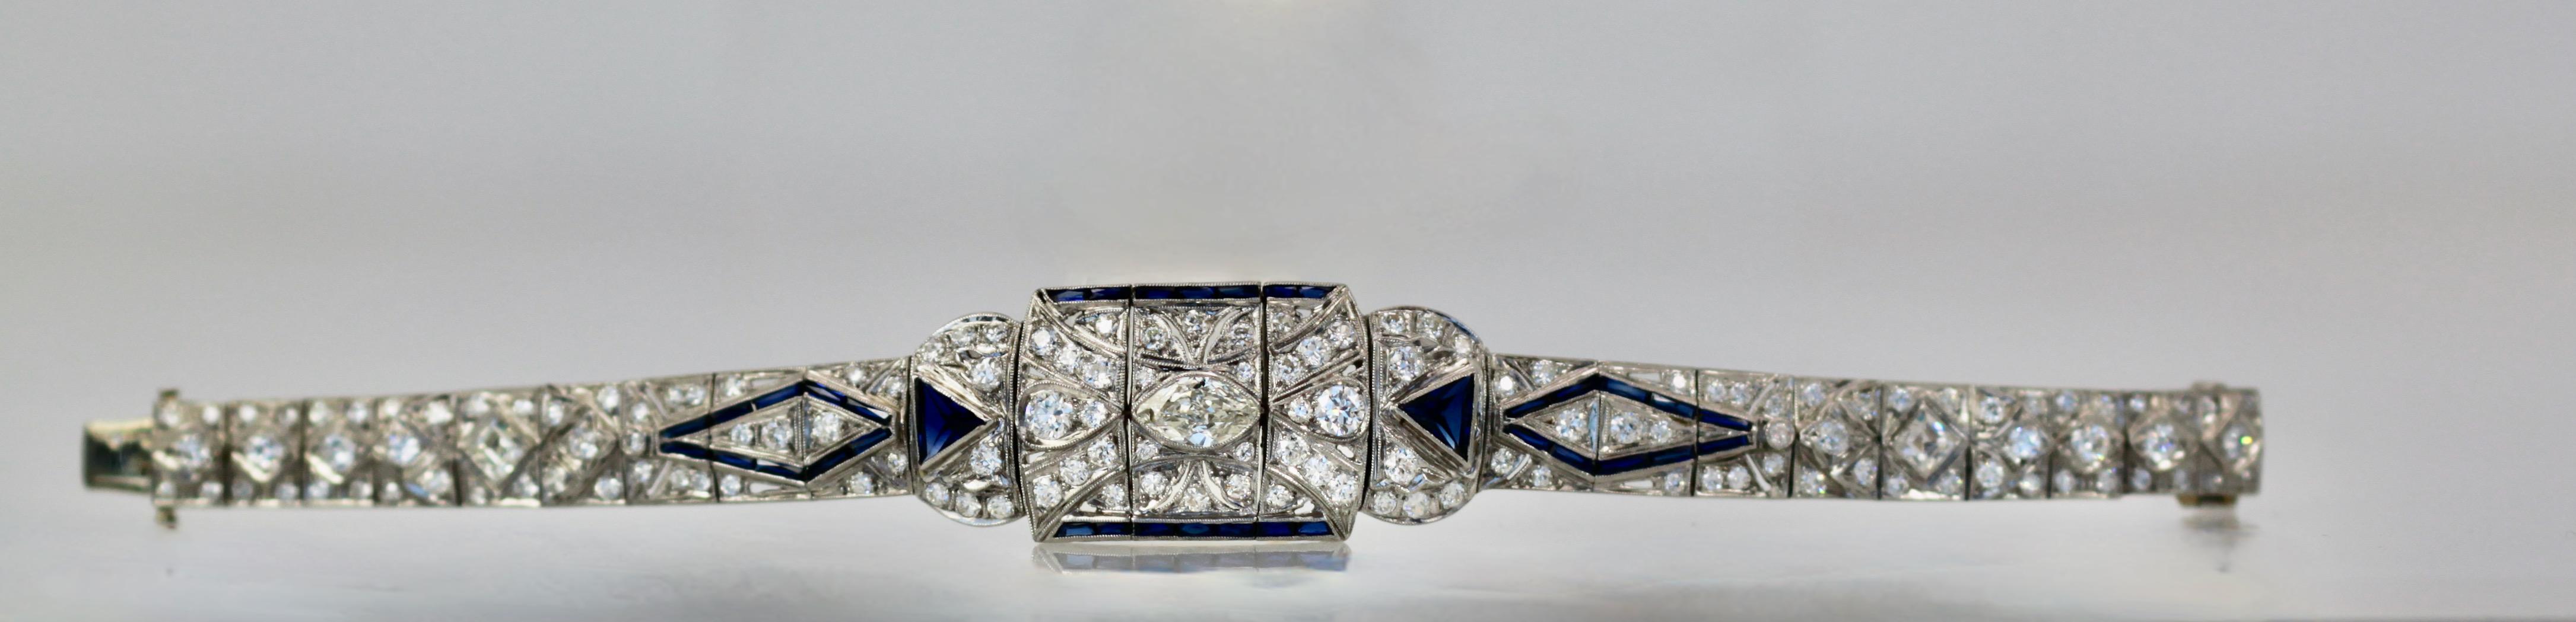 This gorgeous Art Deco Platinum Bracelet is covered in Diamonds mostly round but also it has a center marquise Diamond.  There are 86 round Diamonds and 22 true Blue Sapphires.  The largest Diamond is the center .50 and three center Diamonds of